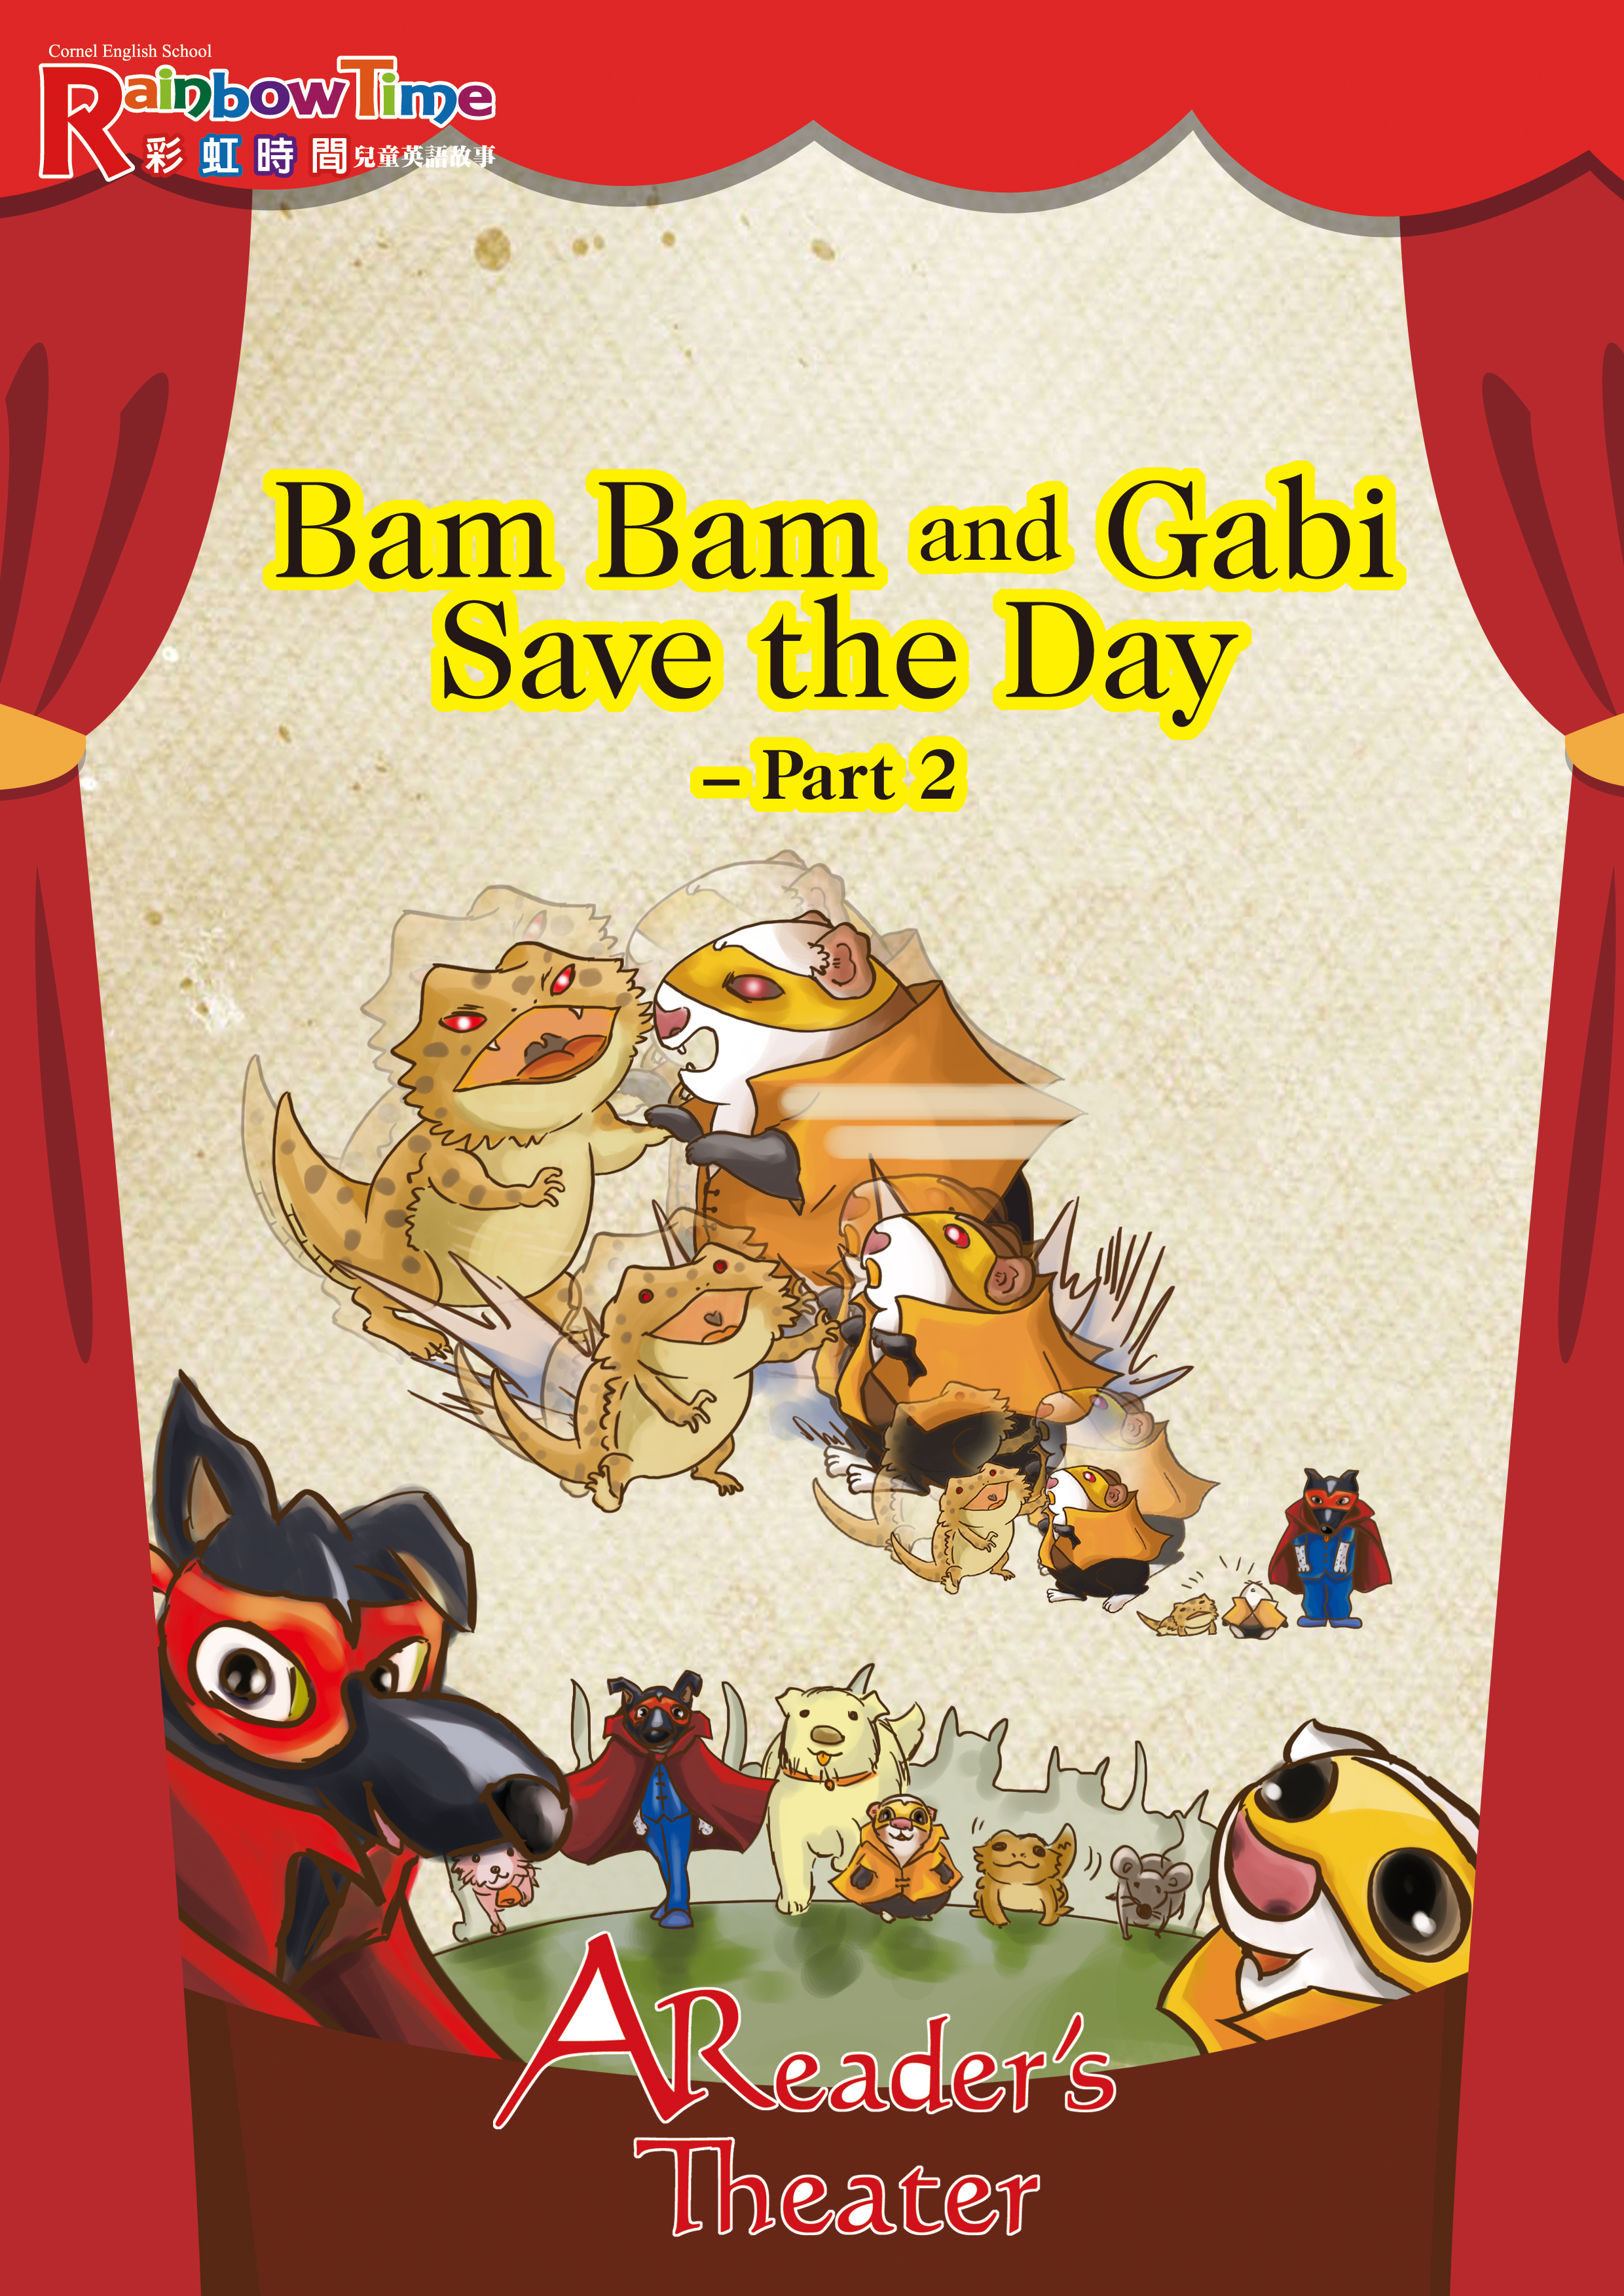 Reader's Theater: Bam Bam and Gabi Save the Day - Part 2